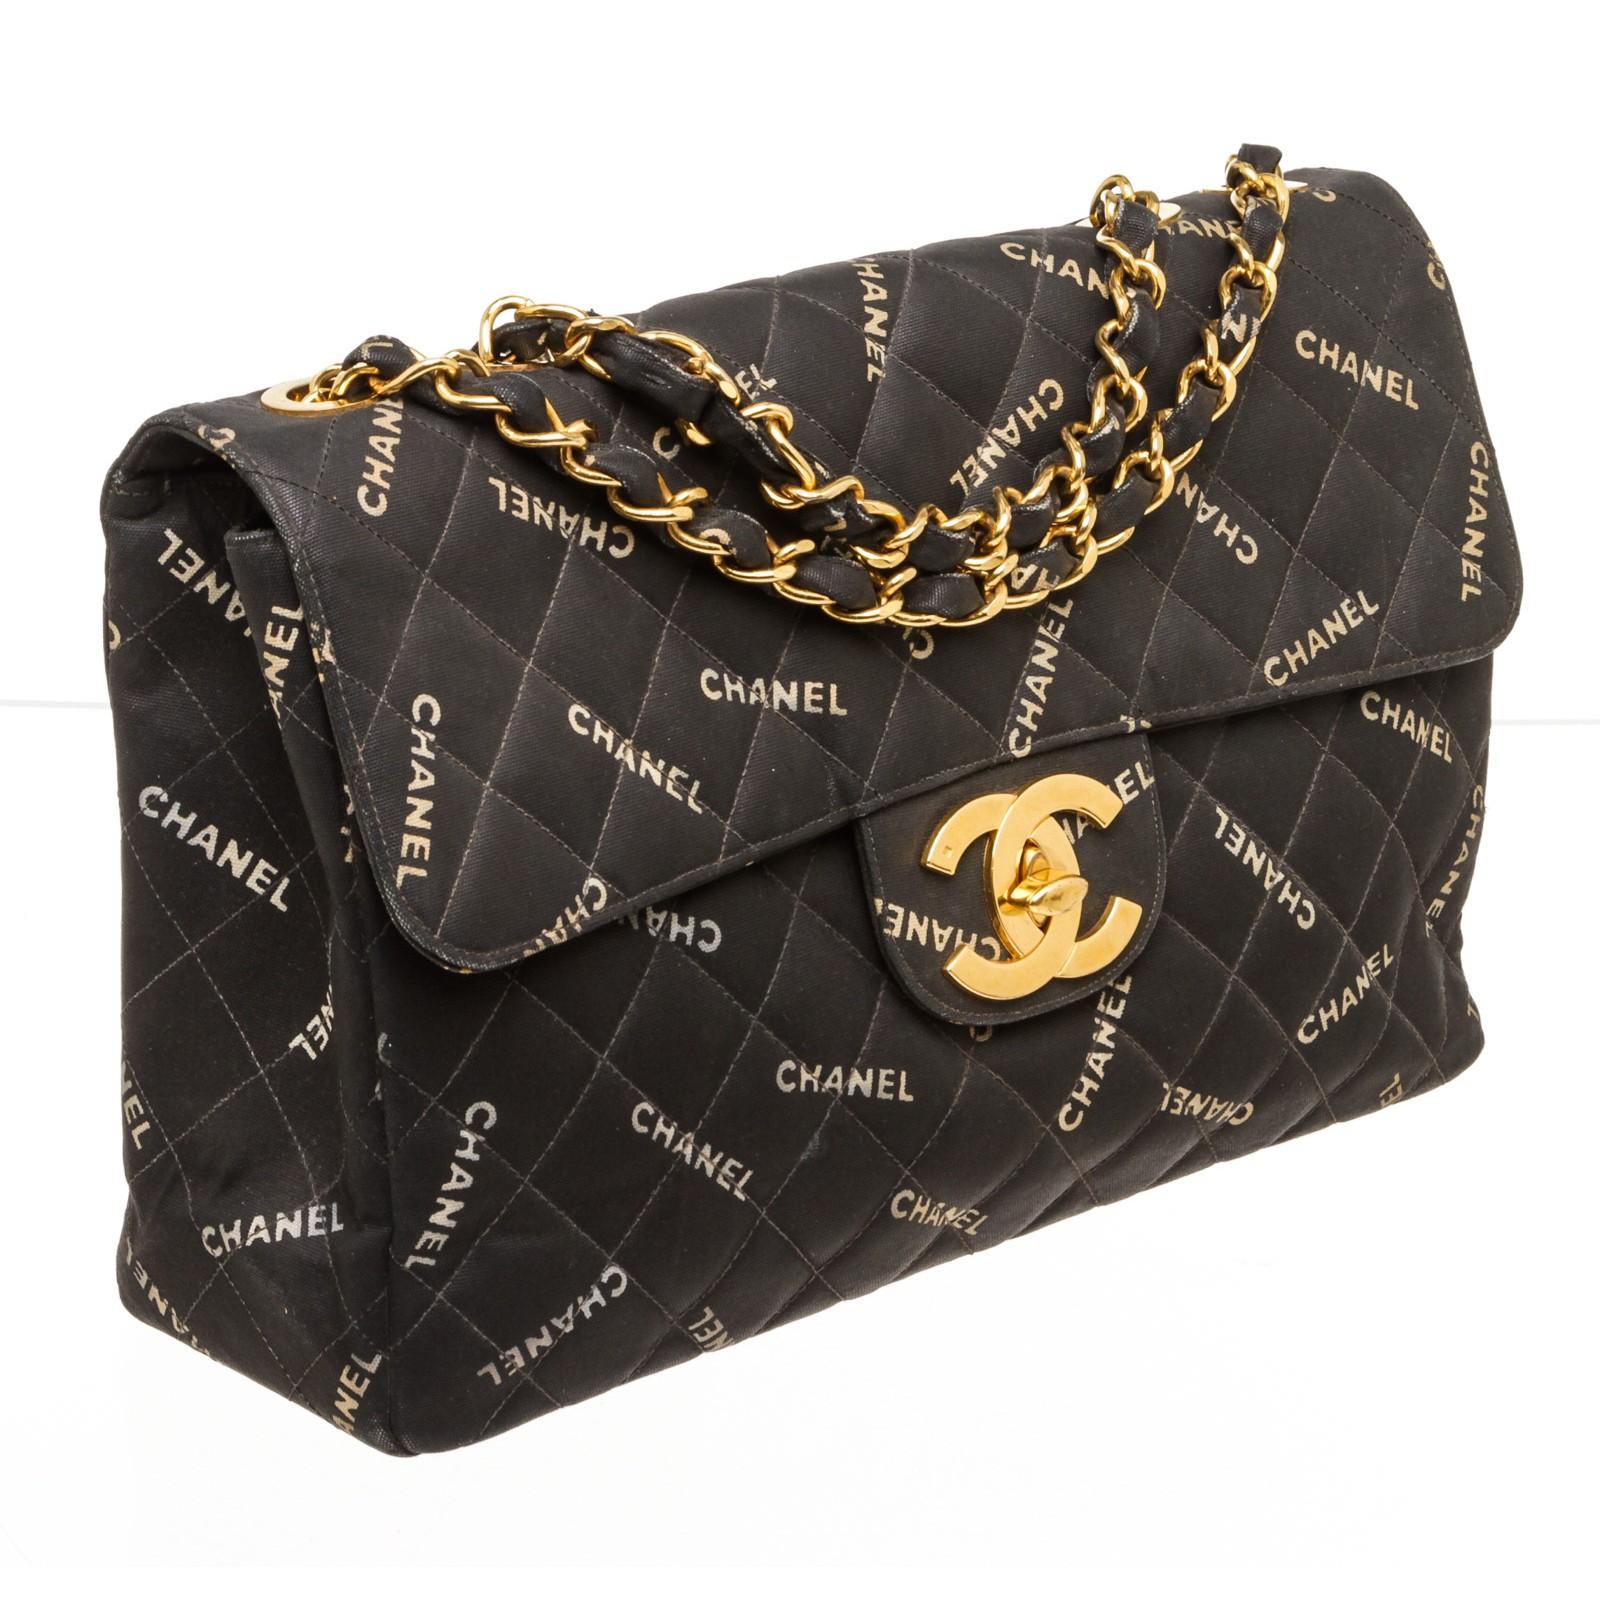 Crafted out of black coated canvas, CHANEL logo throughout canvas, CC turn lock at front, and gold-tone hardware. 18101MSC.